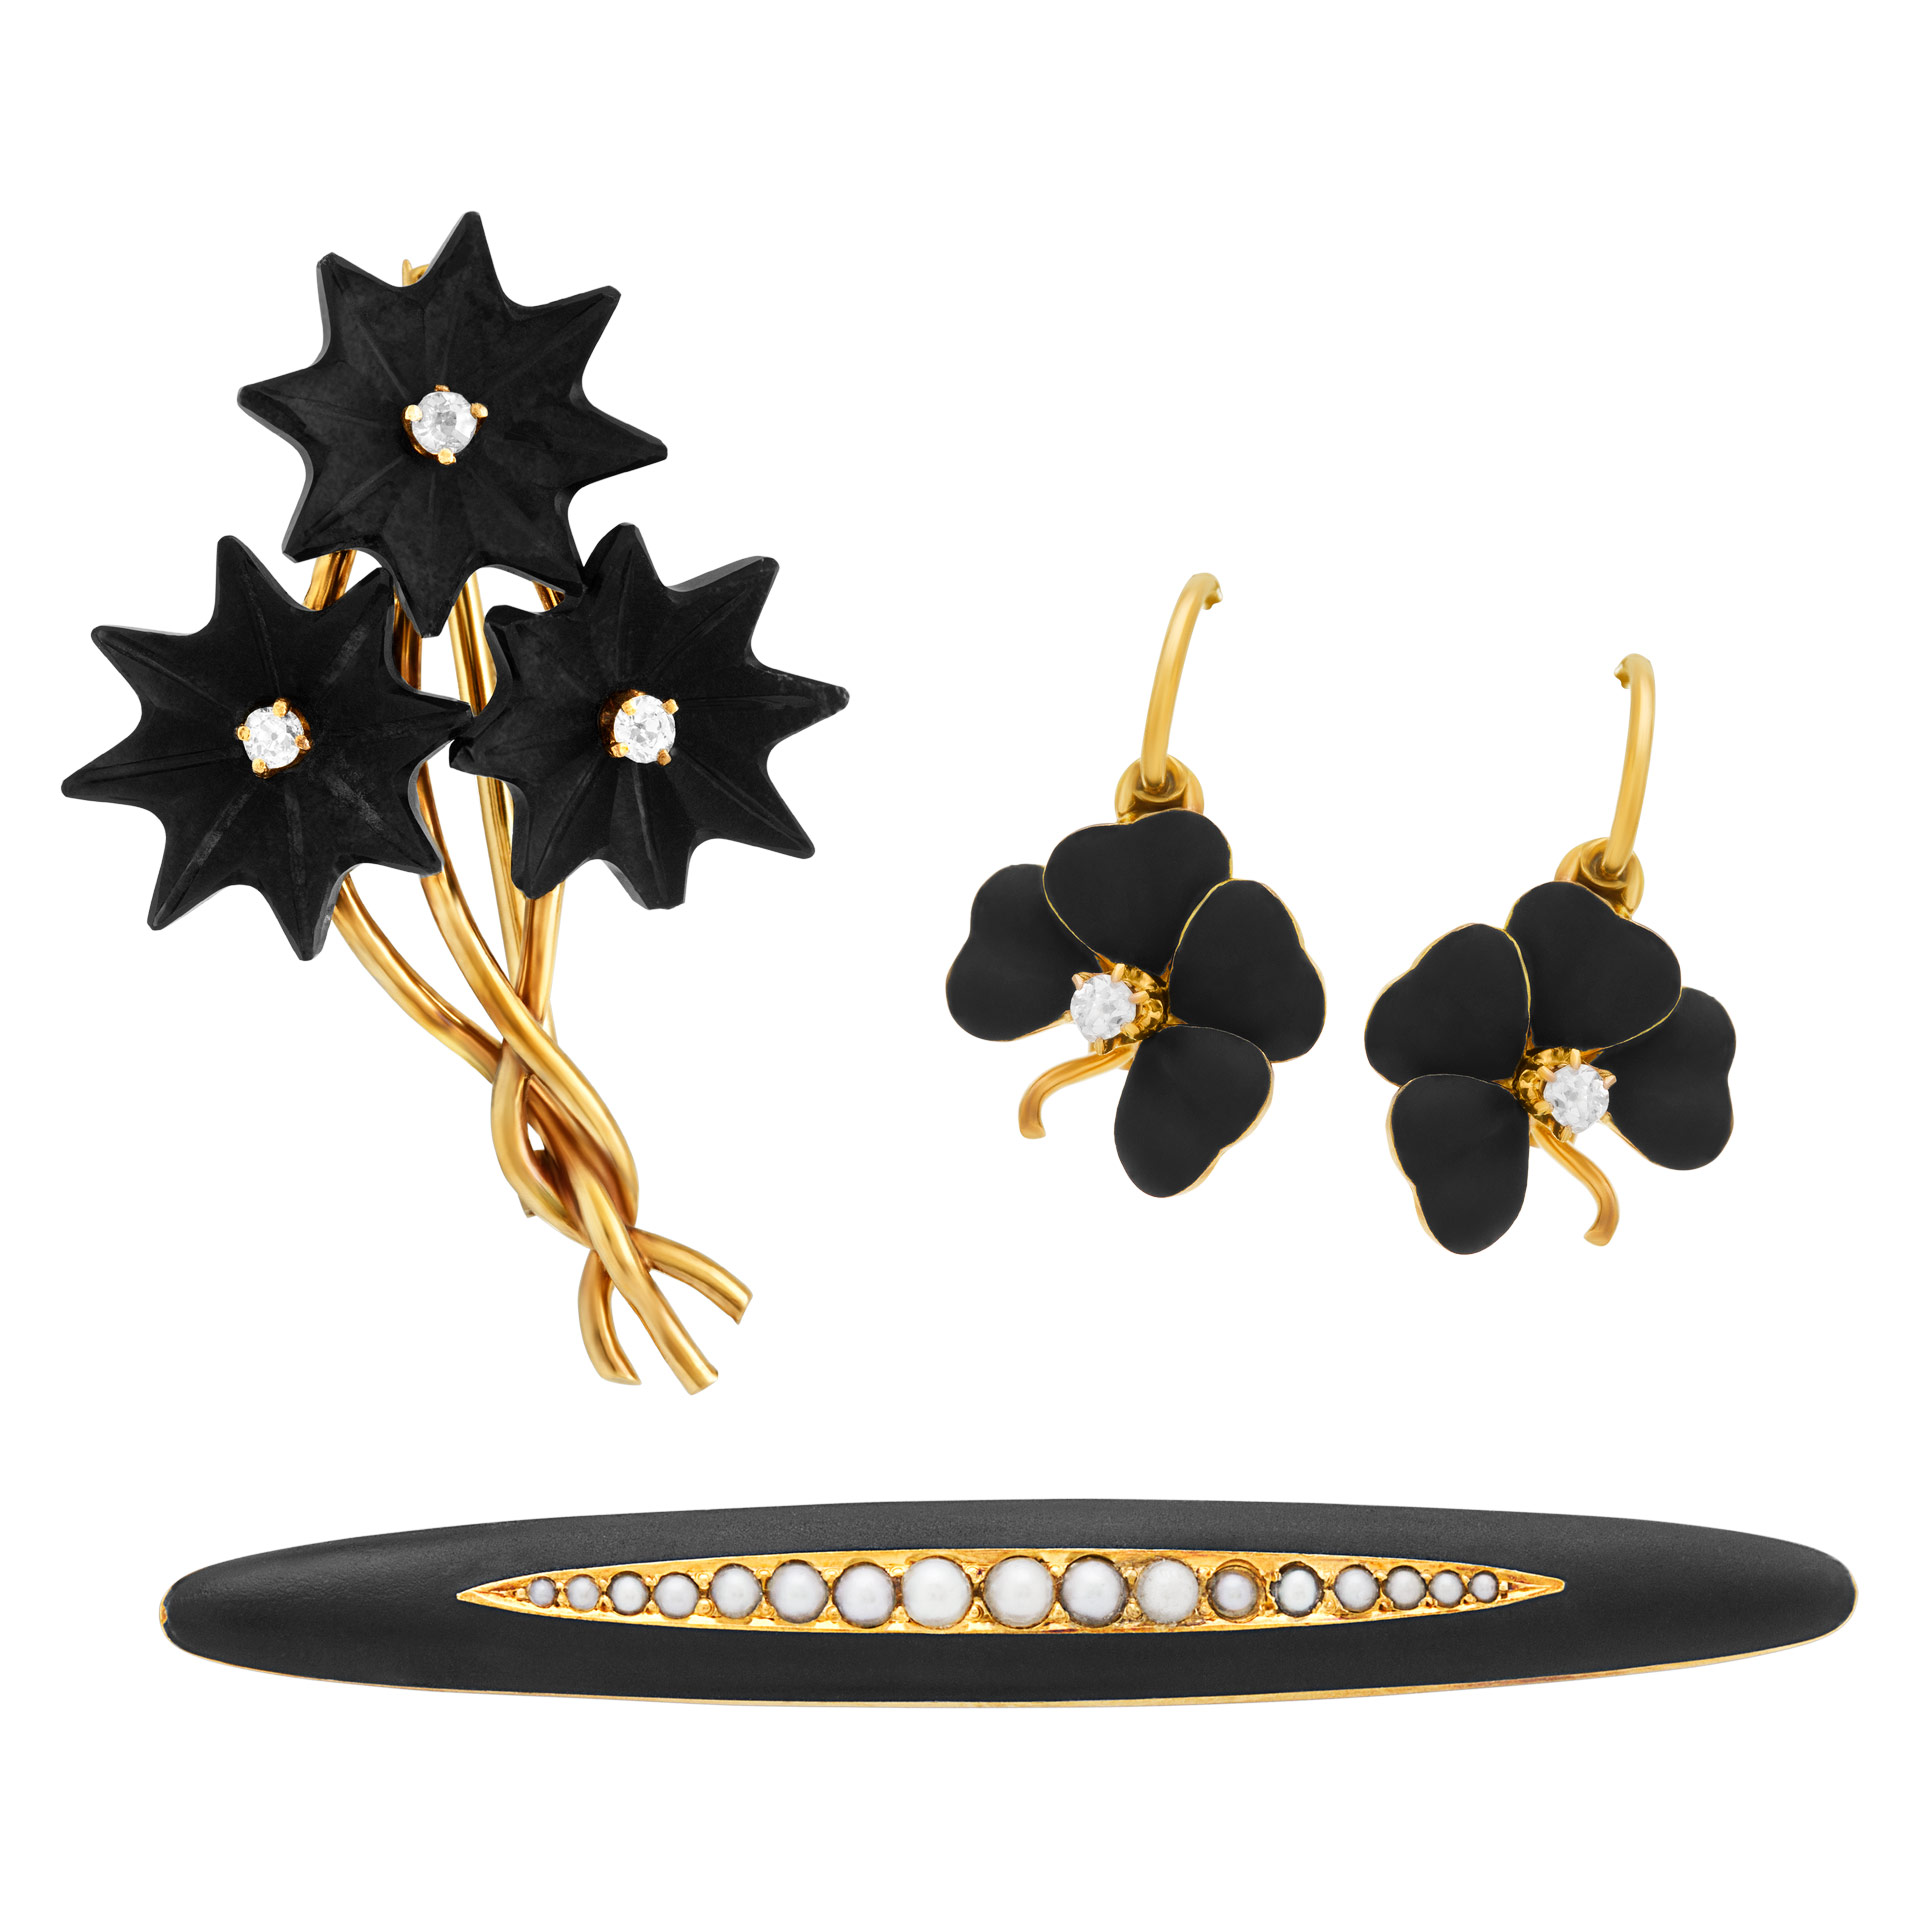 Vintage onyx, enamel and diamond earring and double pin set in 14k yellow gold.